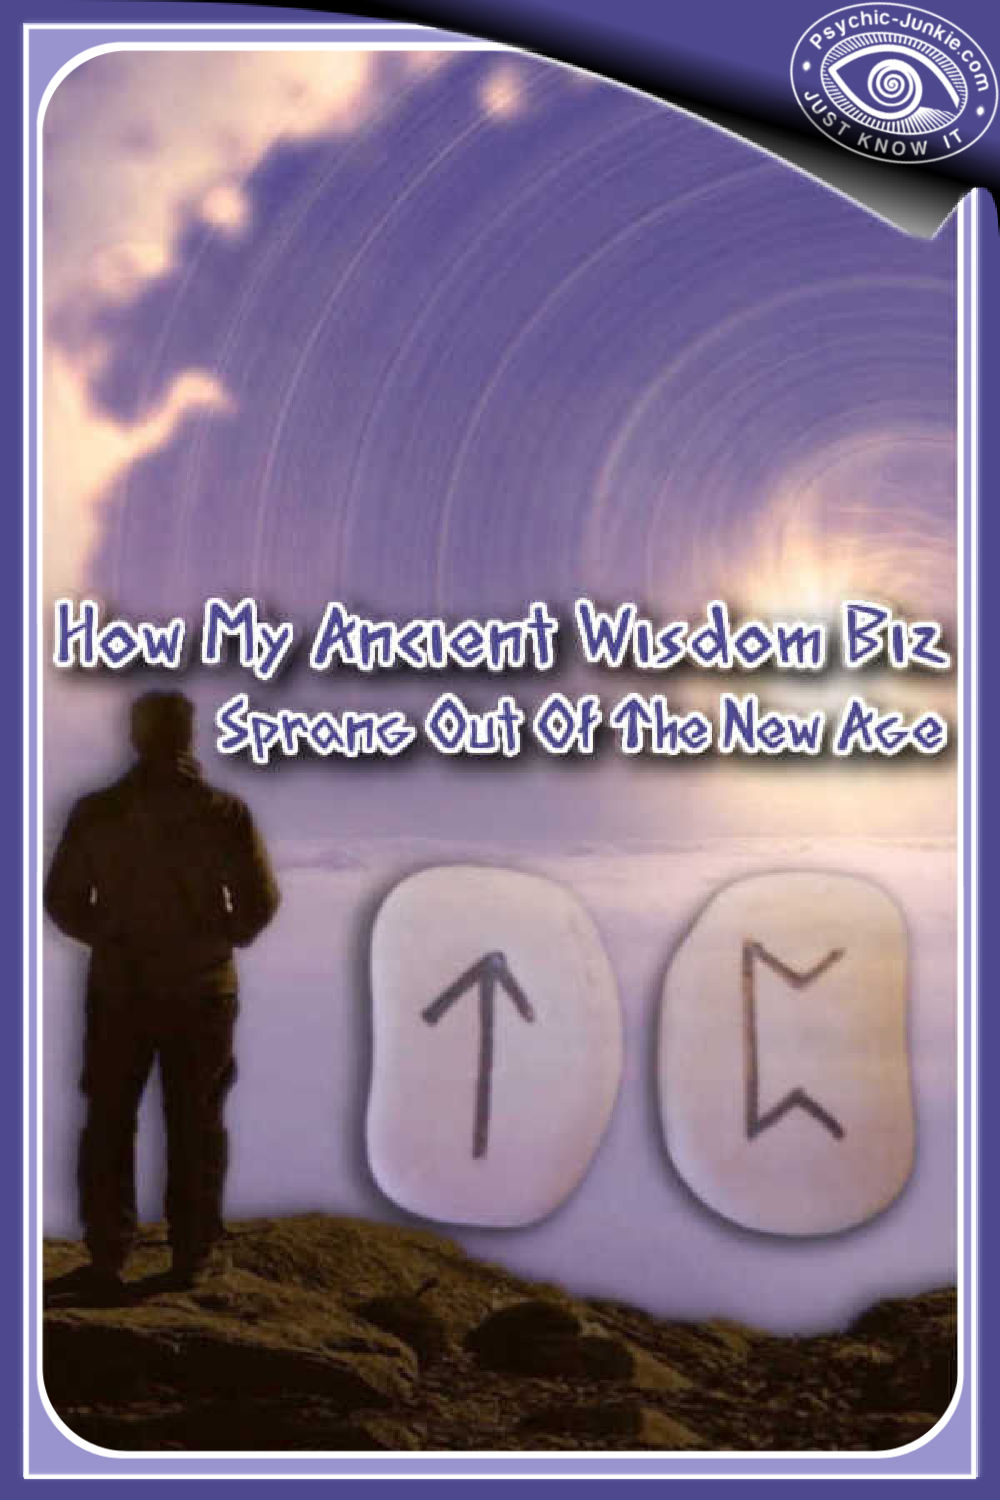 What Led Me to Open Ancient Wisdom Biz?